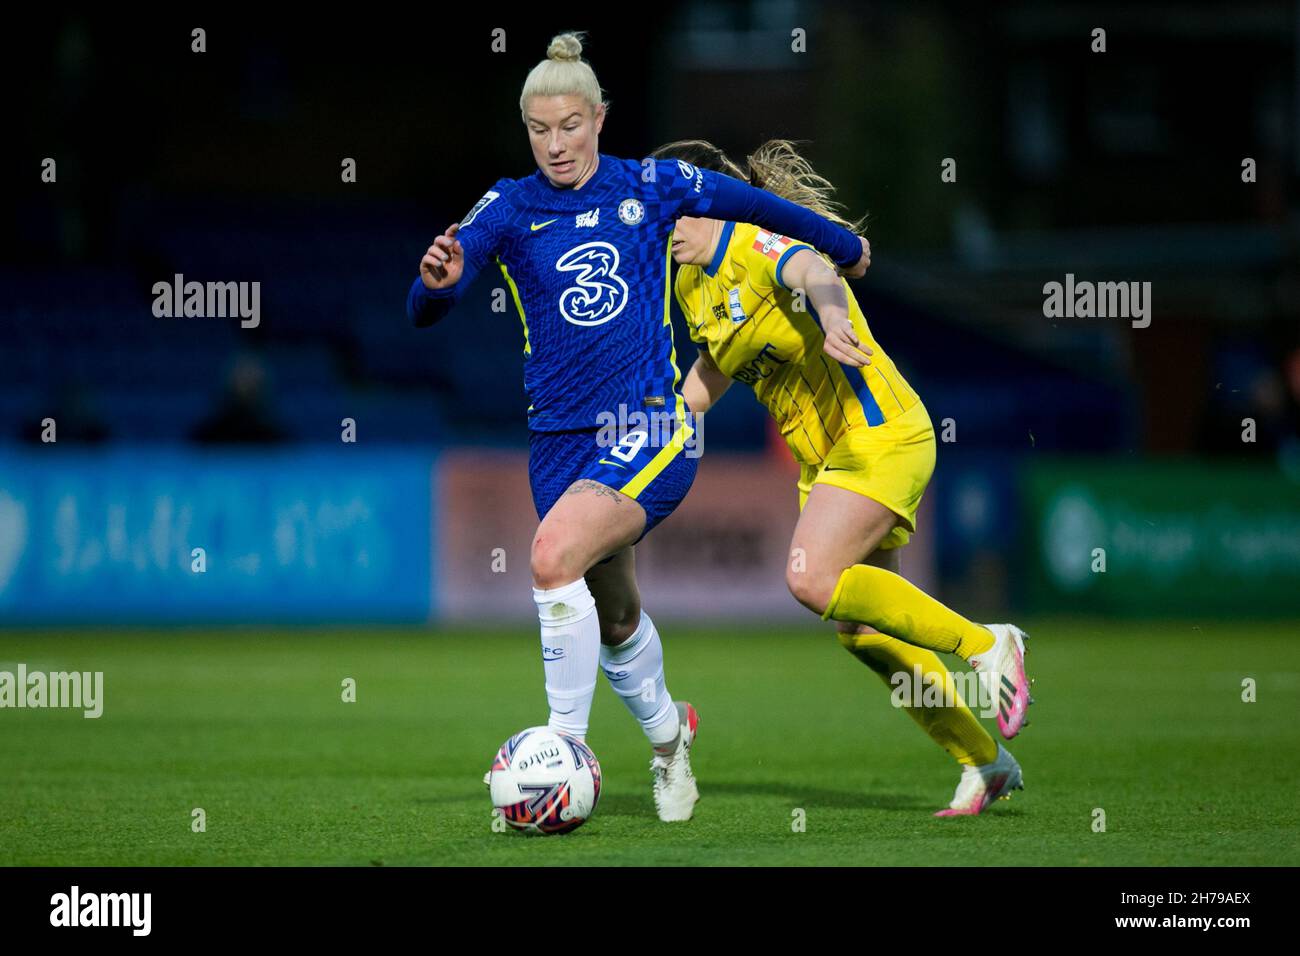 London, UK. 21st Nov, 2021. LONDON, UK. NOVEMBER 21ST : Bethany England of Chelsea FC controls the ball during the 2021-22 FA Womens Superleague fixture between Chelsea FC and Birmingham City at Kingsmeadow. Credit: Federico Guerra Morán/Alamy Live News Stock Photo